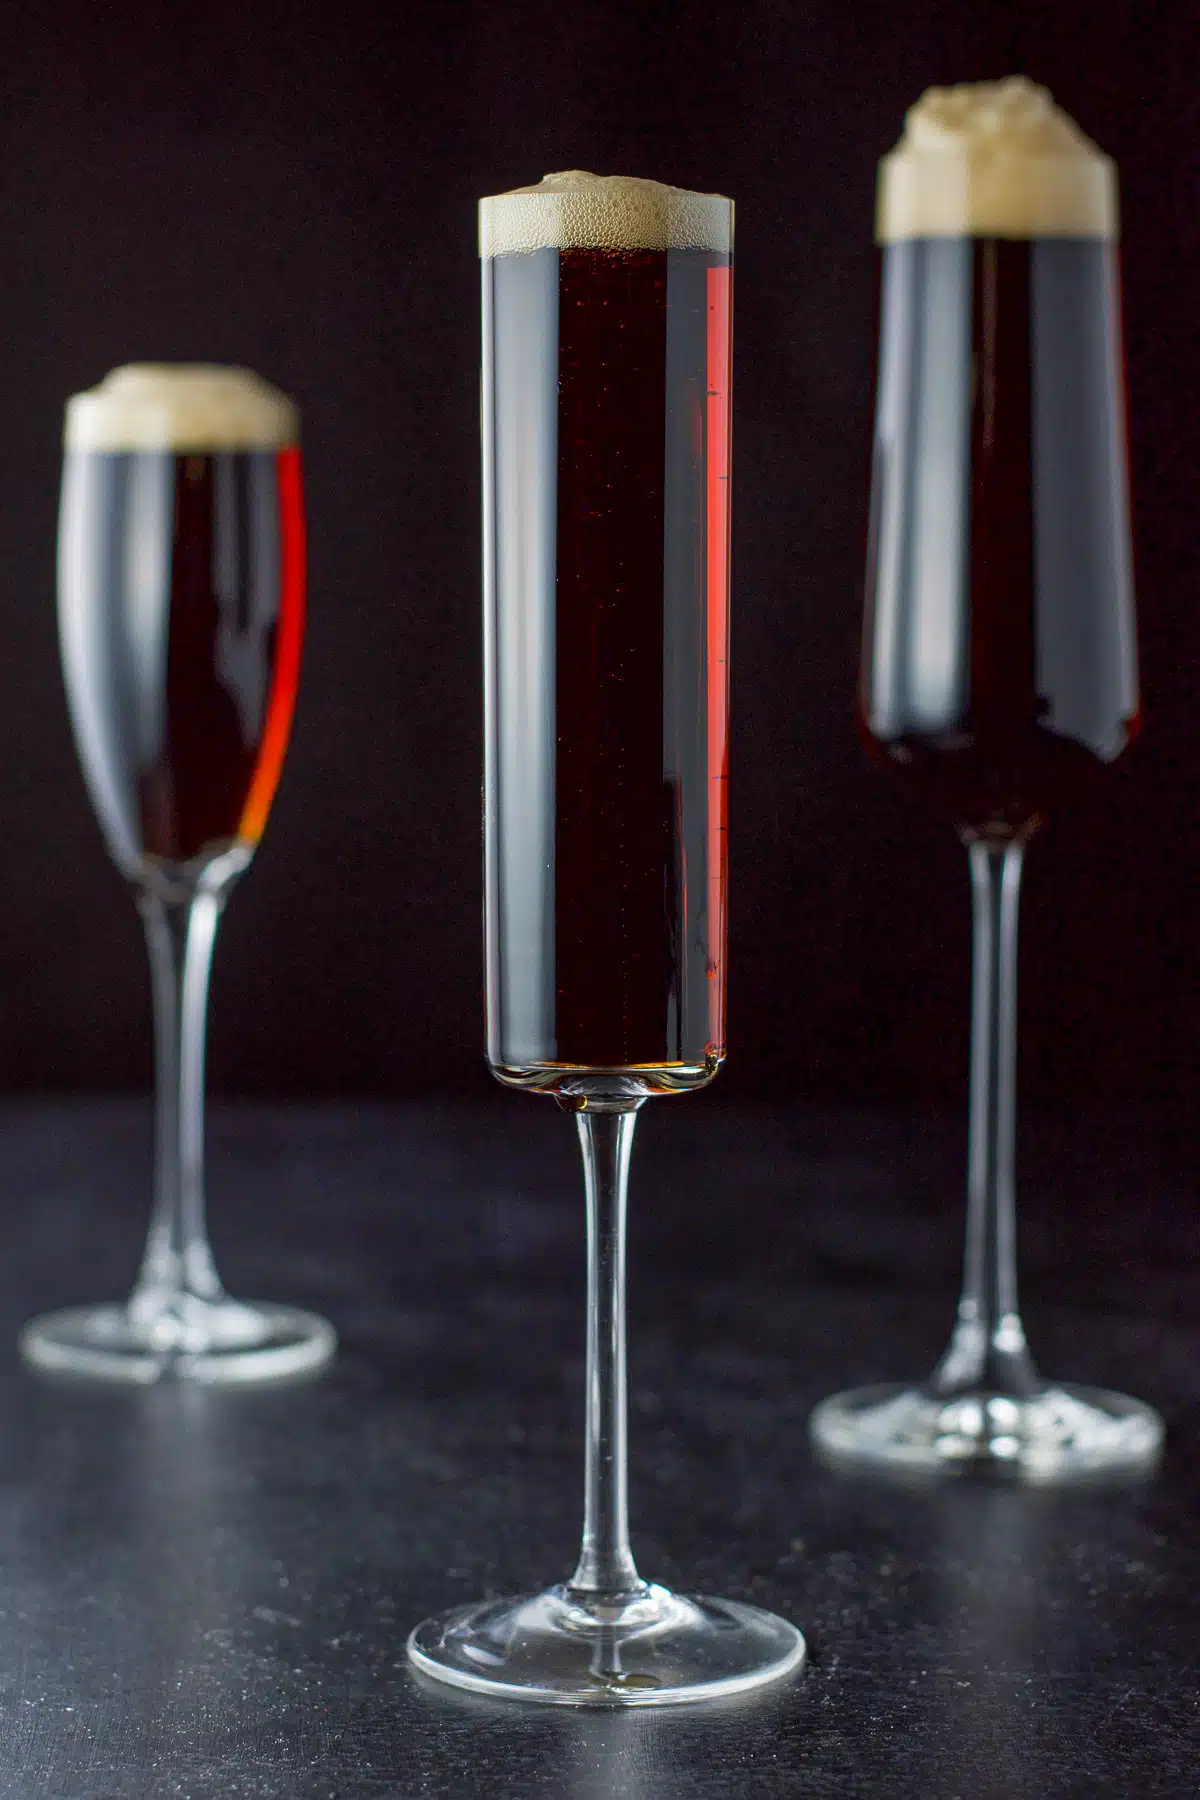 Vertical view of the reddish cocktail in champagne flutes